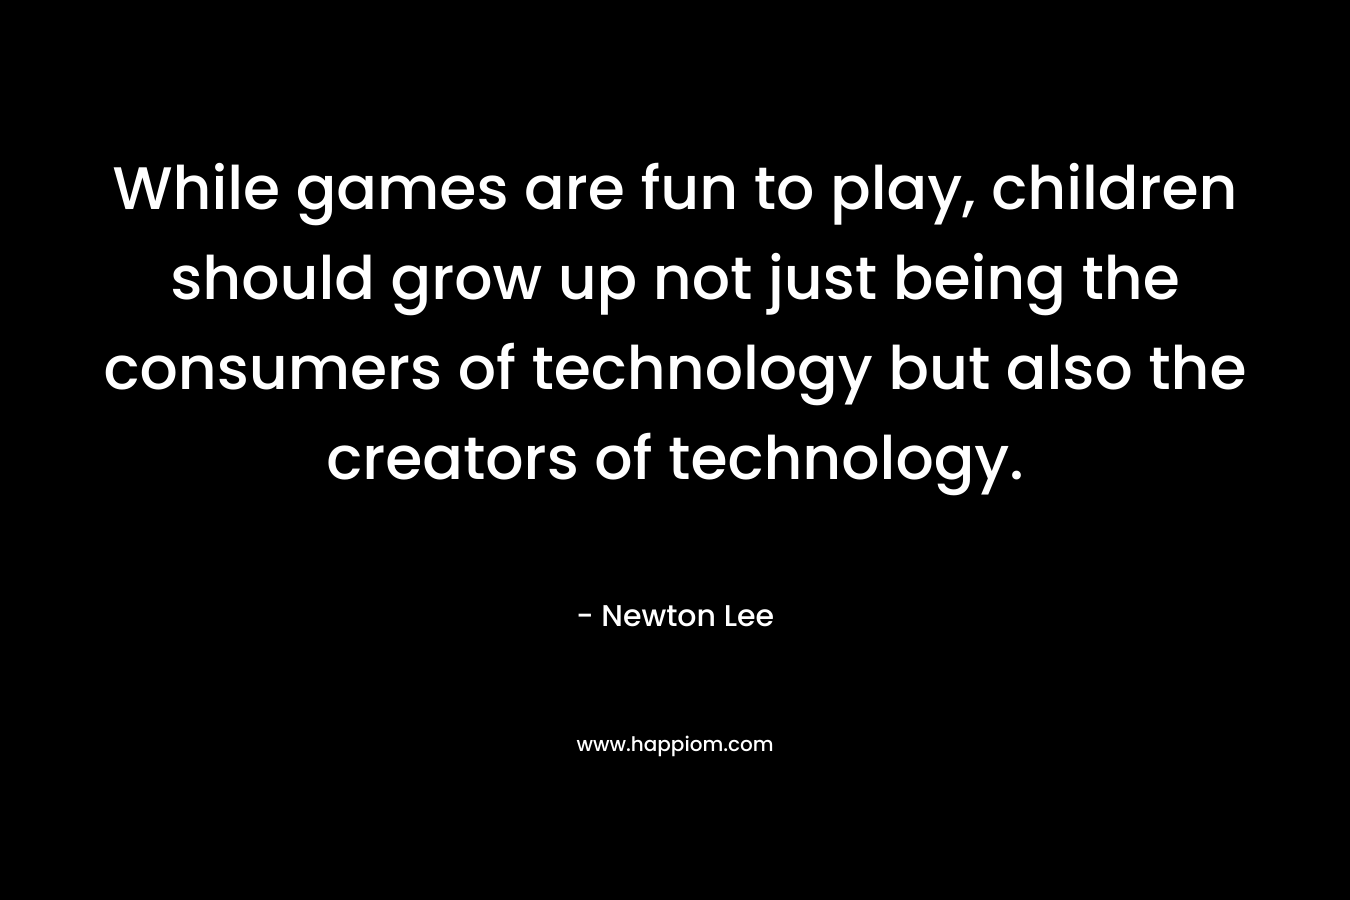 While games are fun to play, children should grow up not just being the consumers of technology but also the creators of technology. – Newton Lee